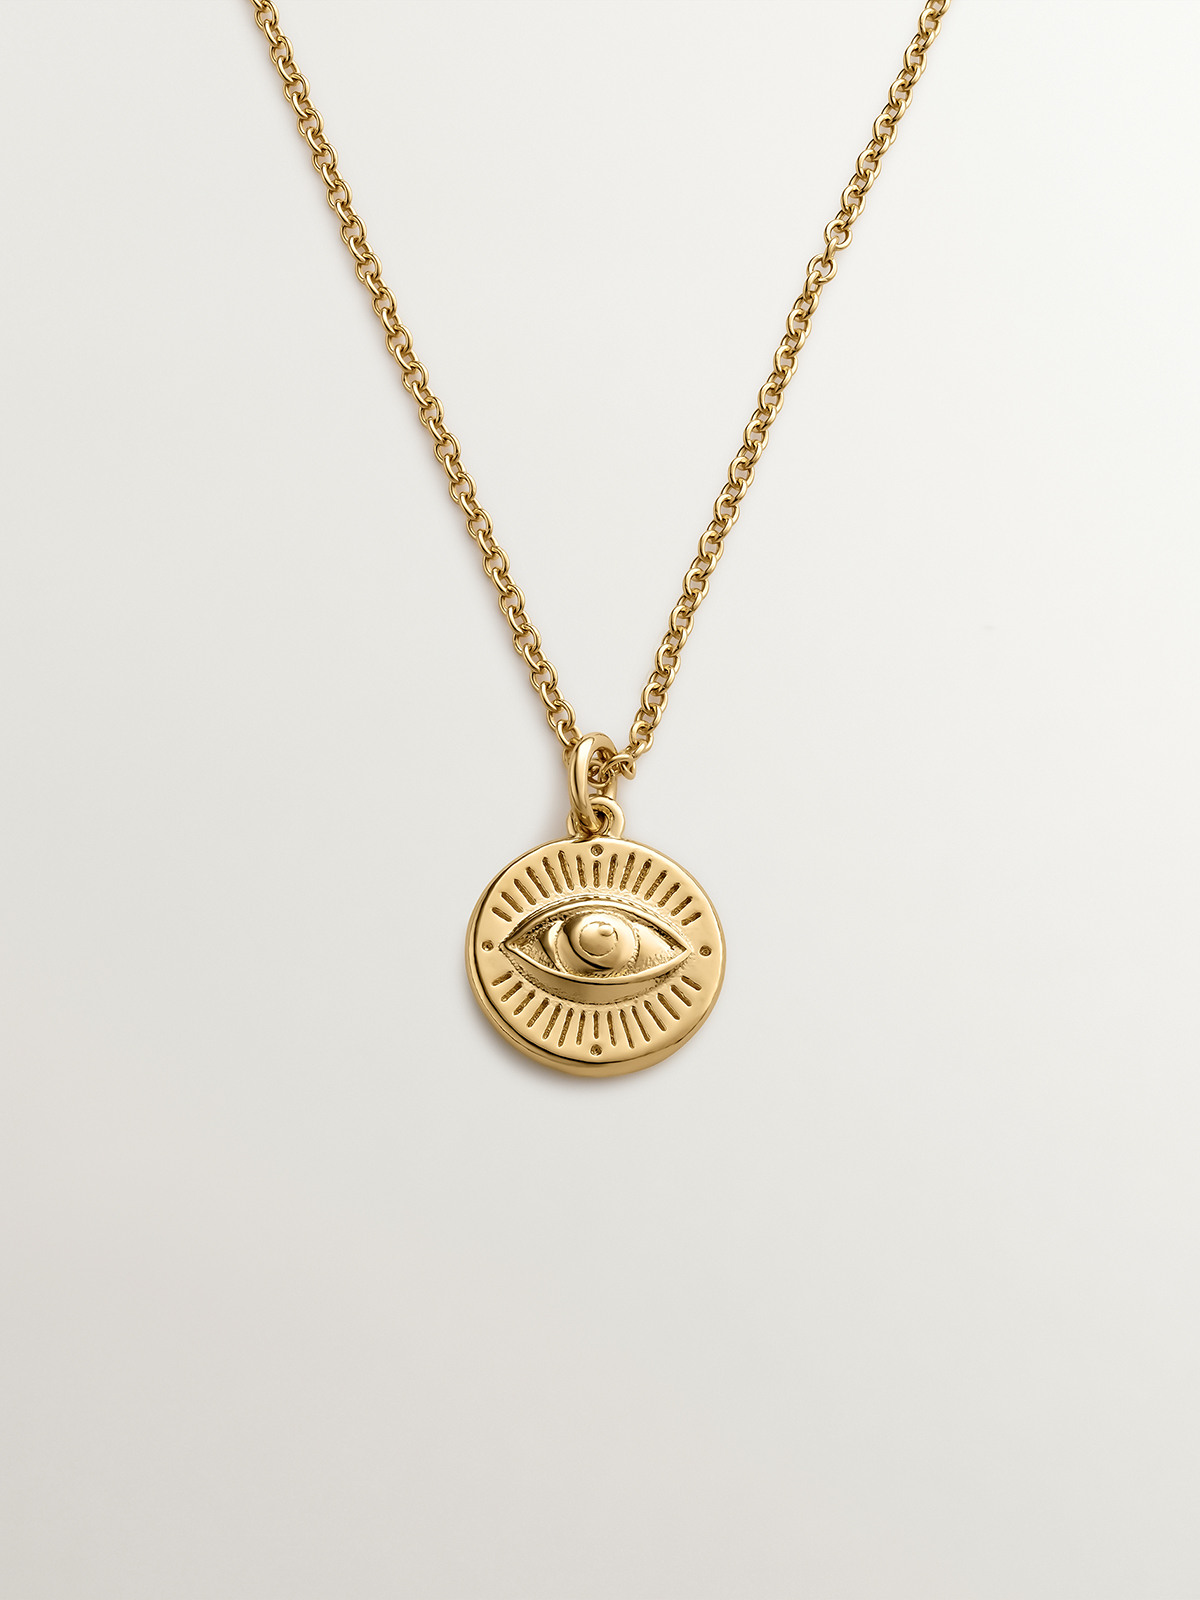 18kt gold-plated silver necklace from the RUSH Collection